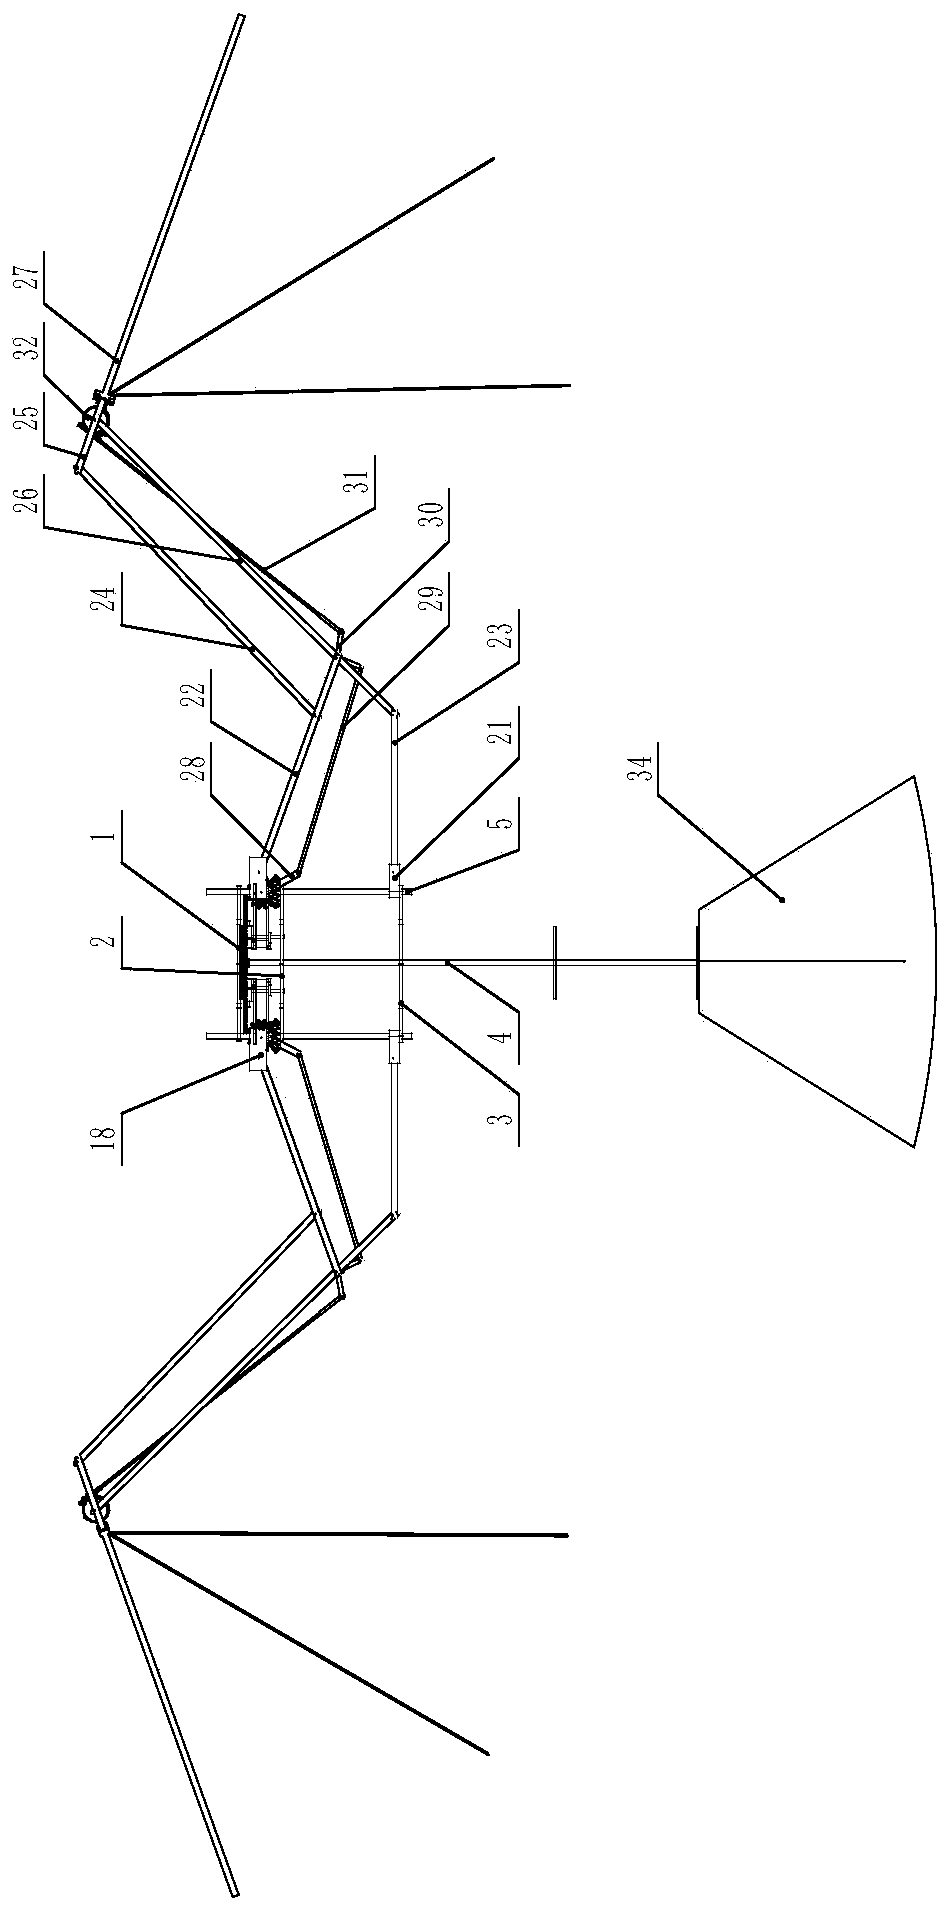 Double-section flapping wing aircraft with deployable active folding wings